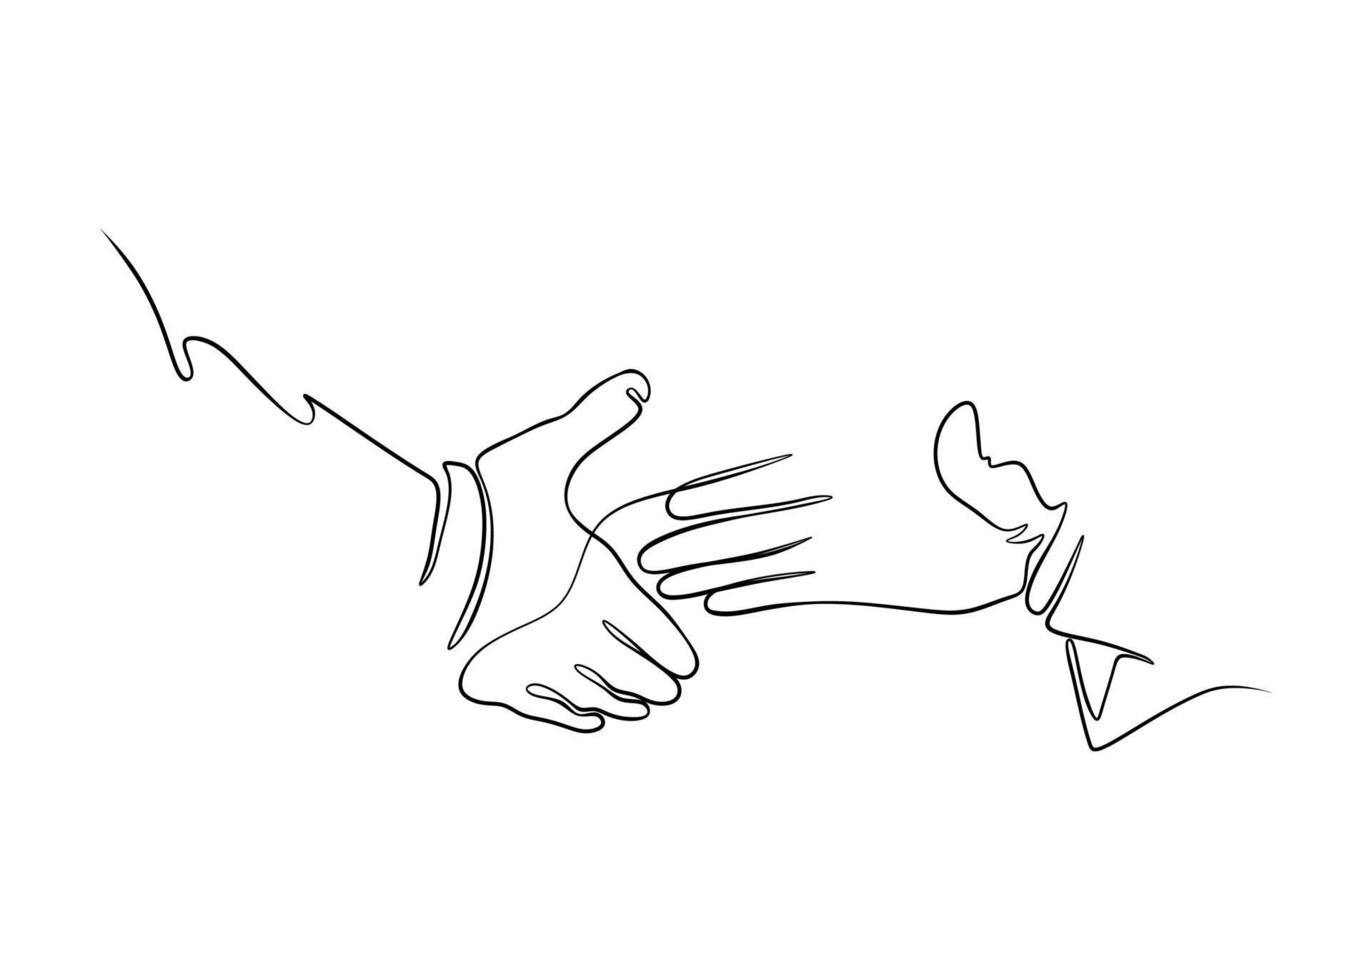 two hands come close to shake hands to cooperate, one line contagious line vector illustration